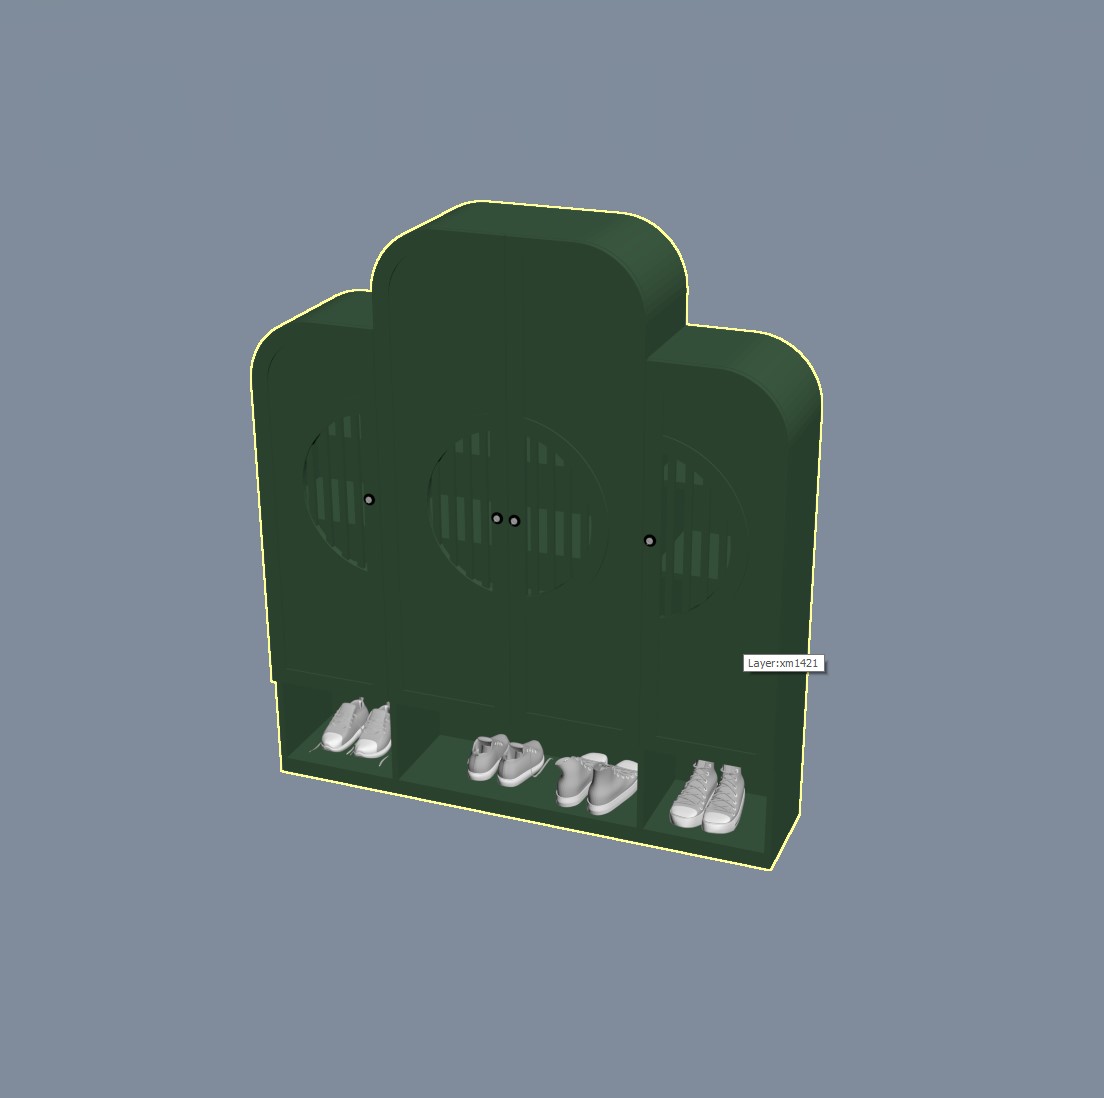 10326. Download Free Shoe Cabinet Model By Hieu Tran